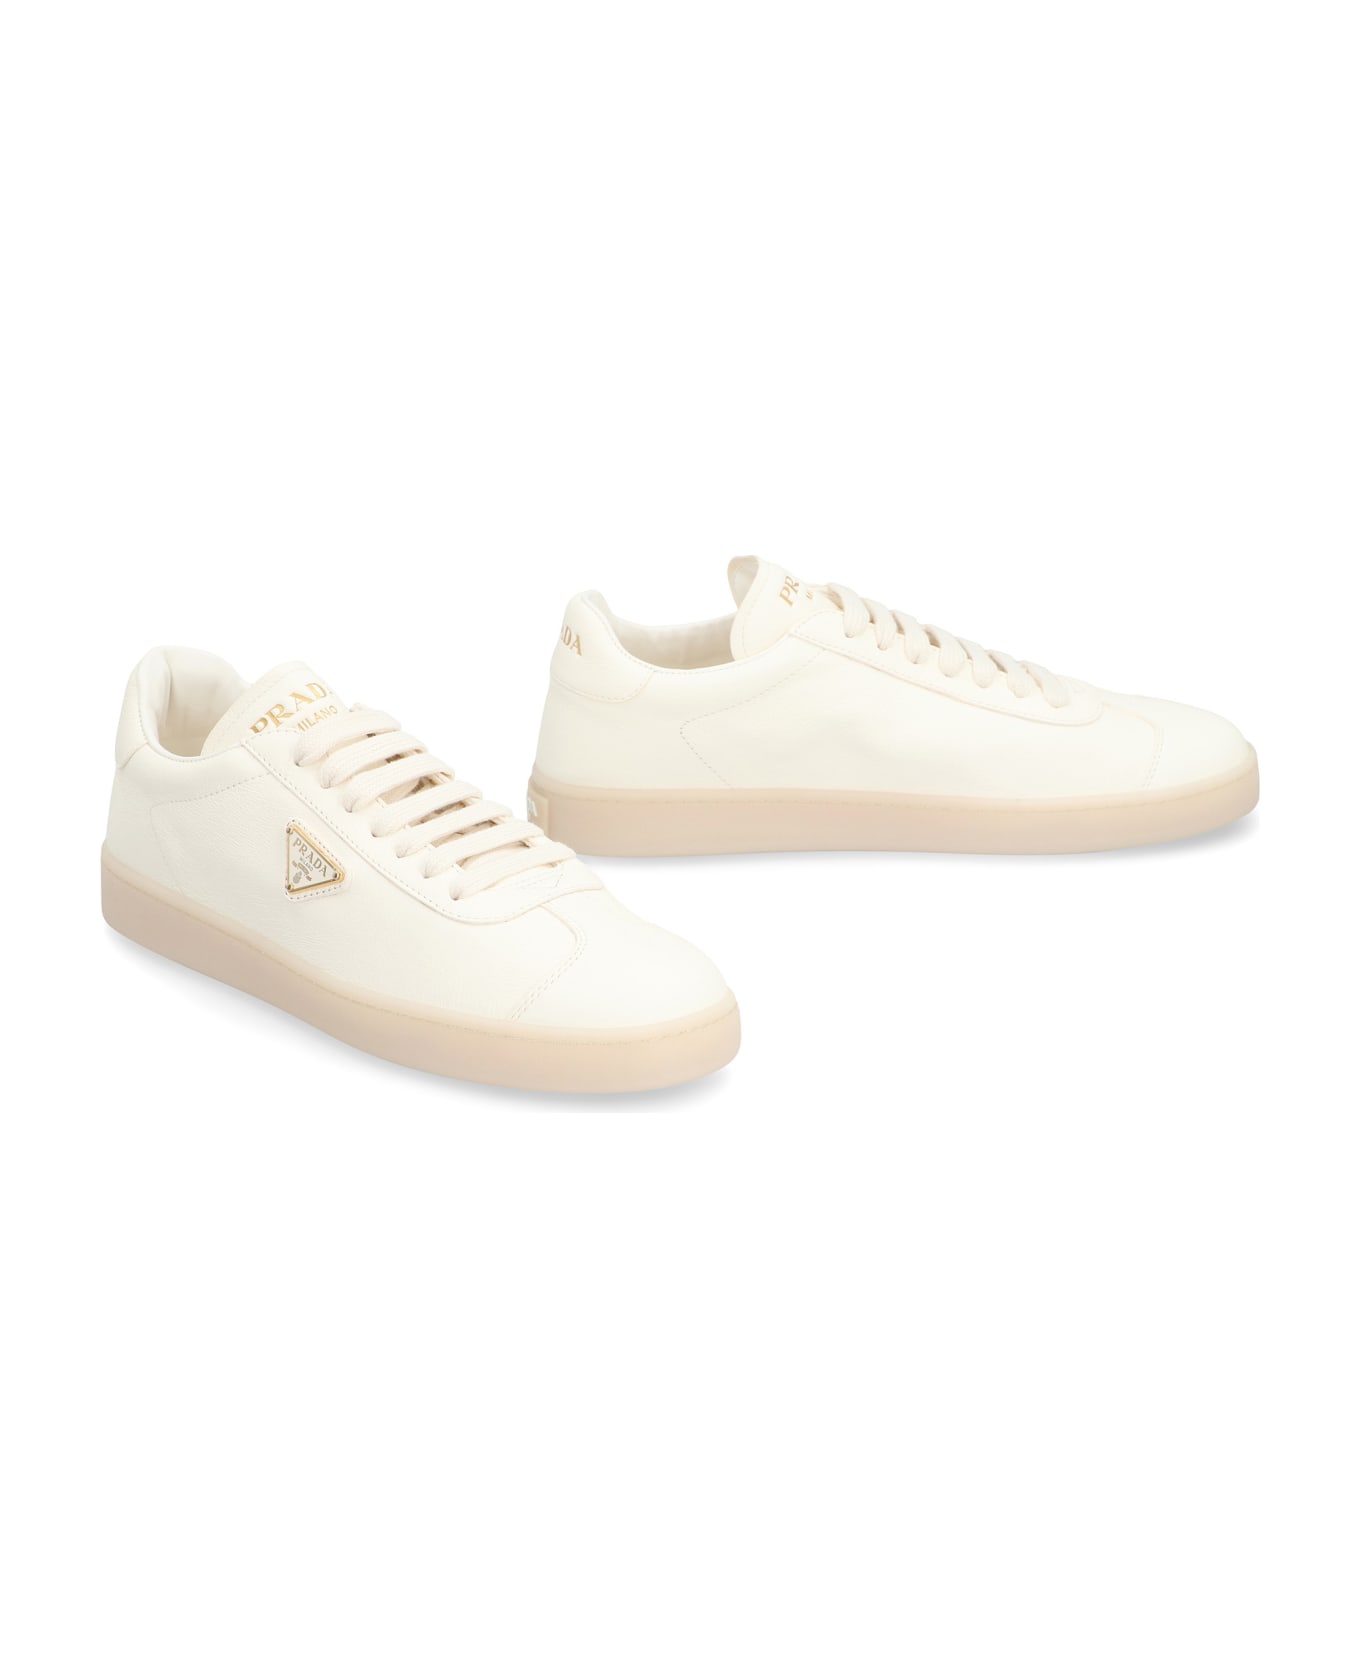 Prada Leather Low-top Sneakers - Ivory